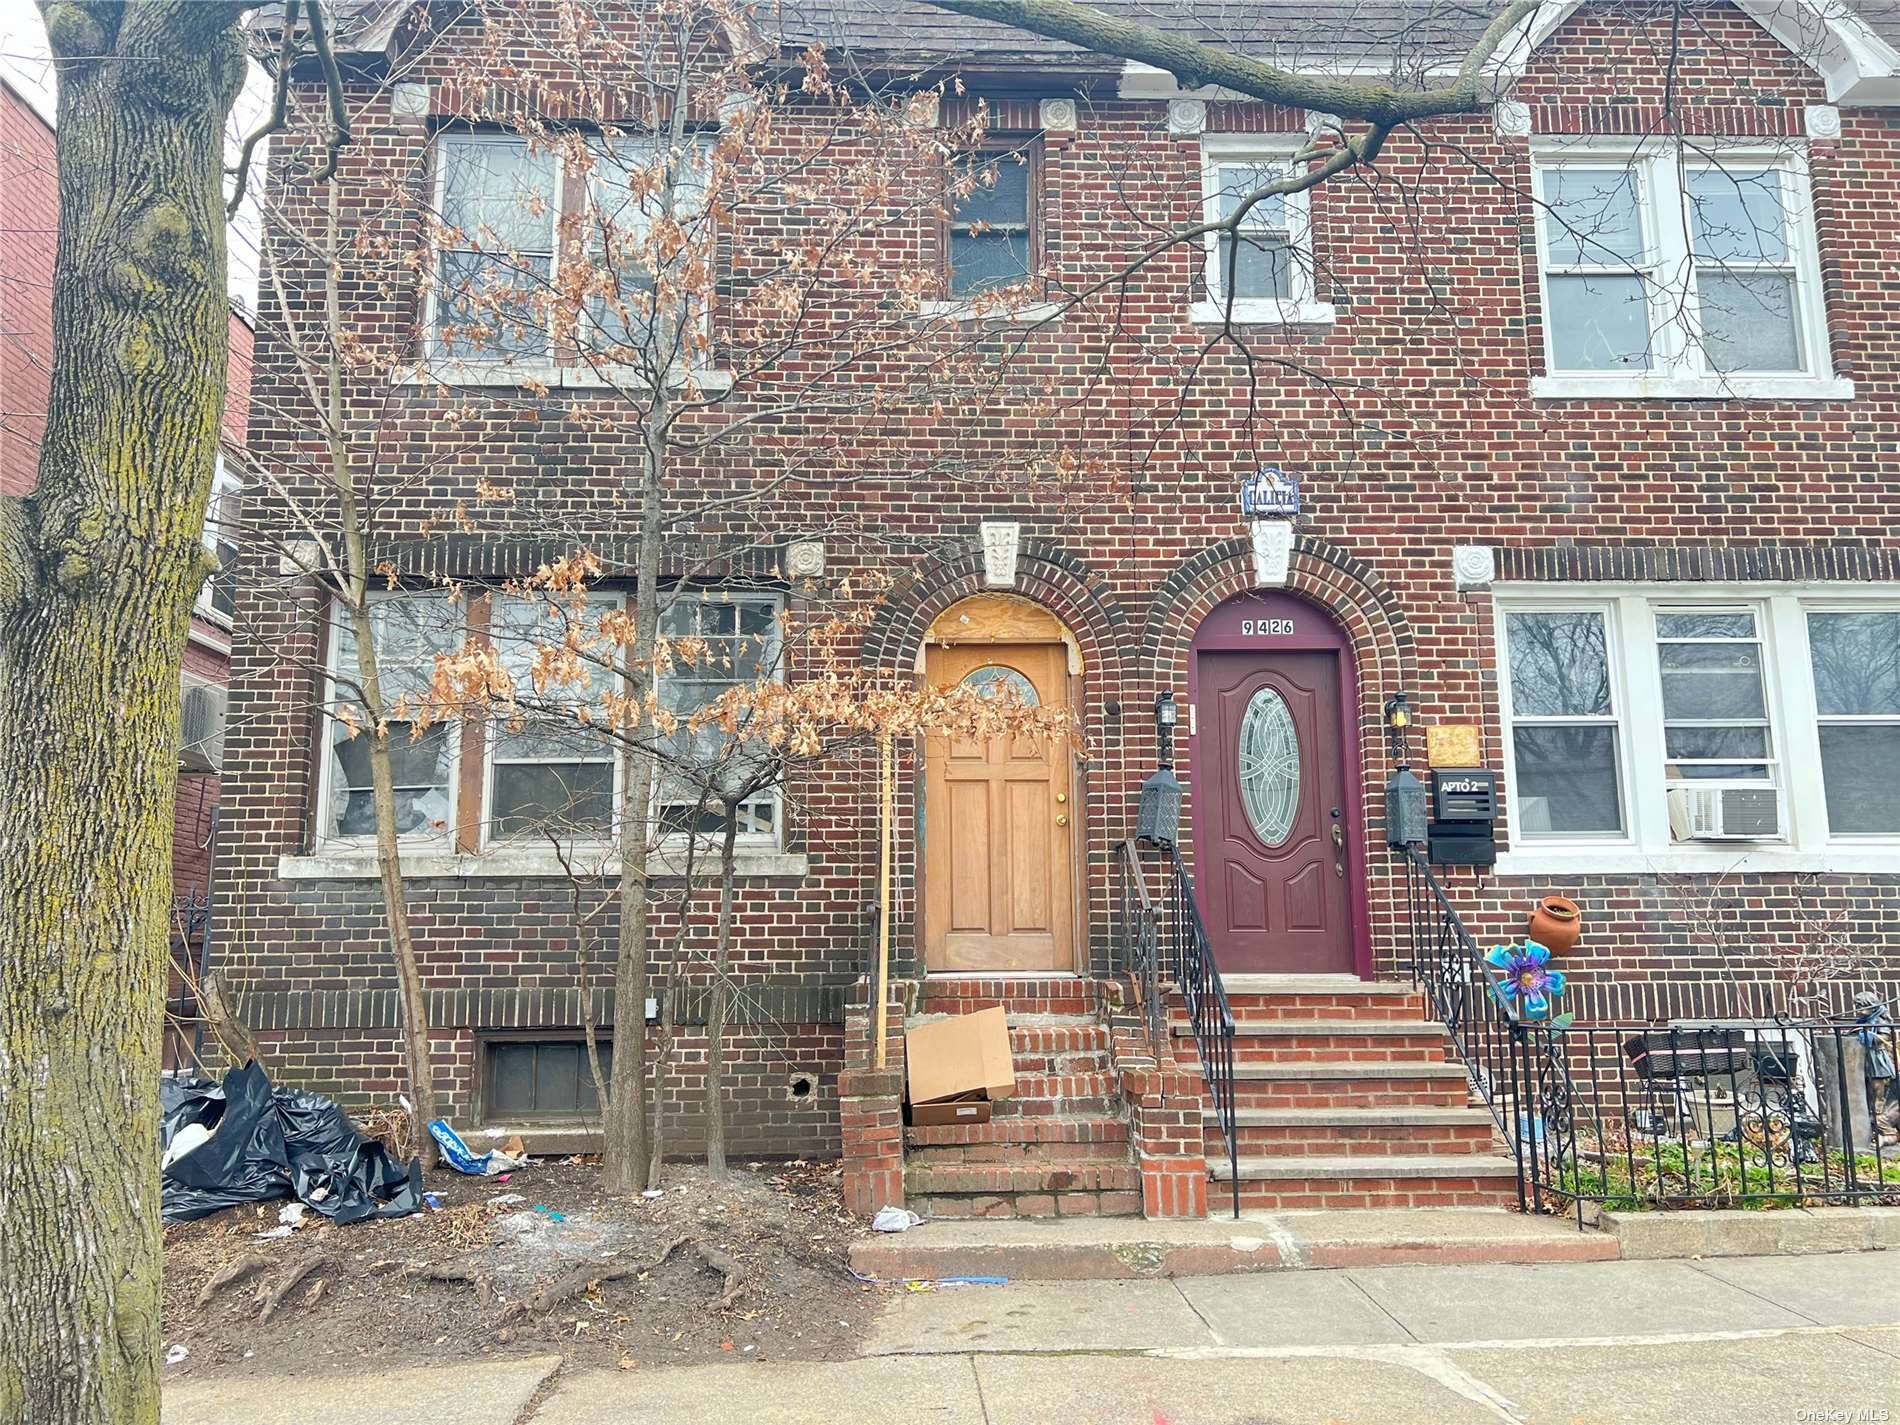 Legal 3 family, presently has one gas meter, complete renovation needed, house fully gutted, no kitchens, bathrooms exist, cannot qualify for mortgage.